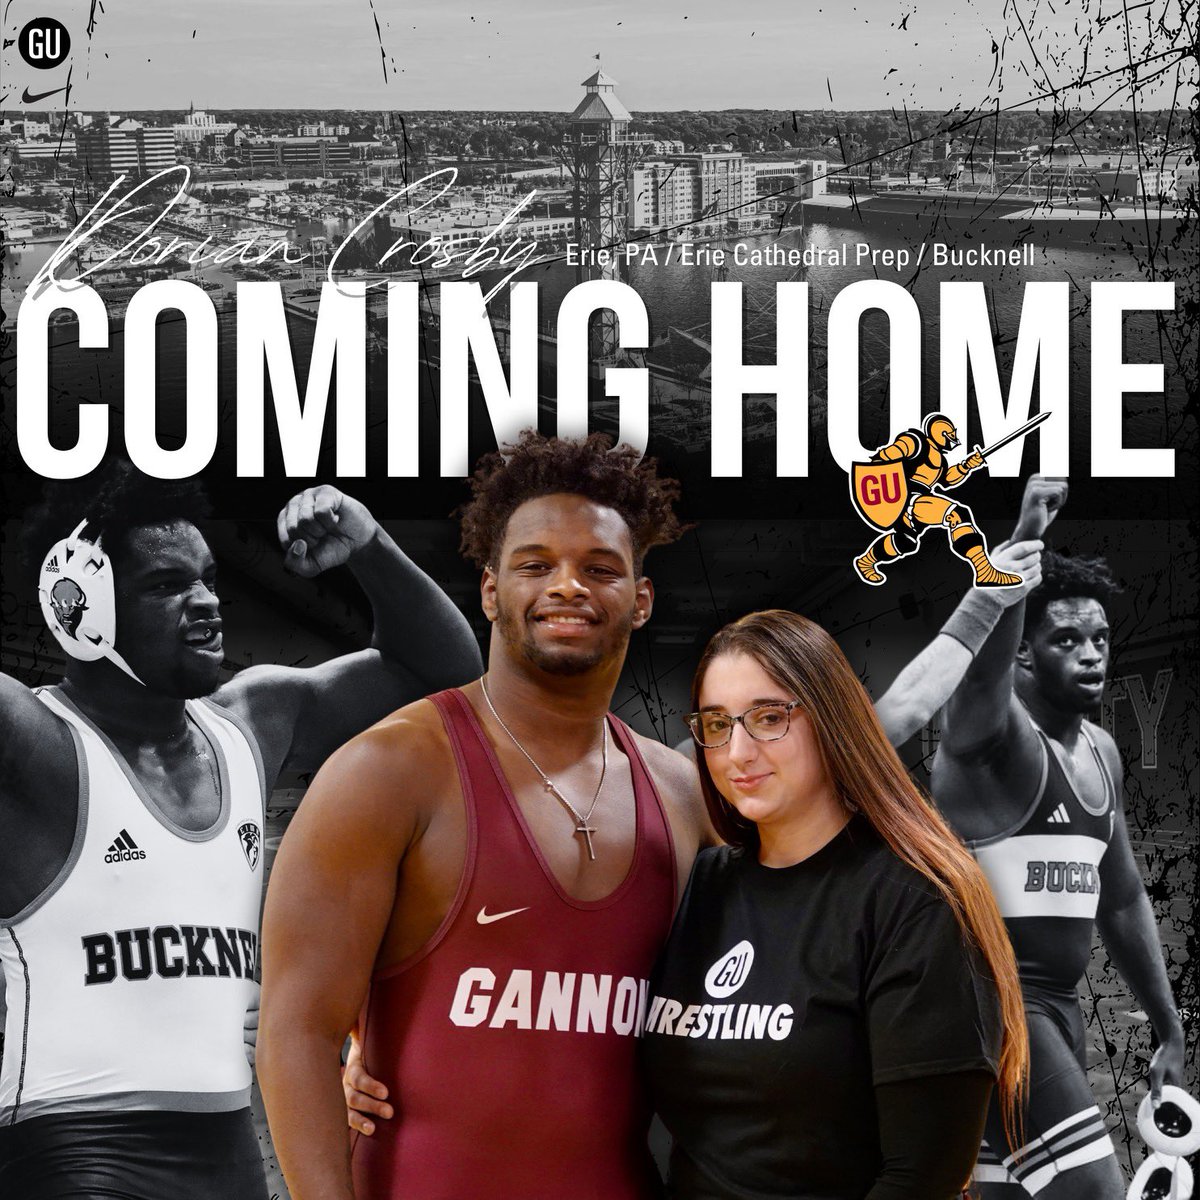 COMMITTED!!! I have committed to Gannon University to obtain a masters degree and finish out my wrestling career back home! Thank you, Bucknell University for the family they gave me!I am grateful for the opportunity to wrestle at Gannon University and end my career at home⚔️‼️